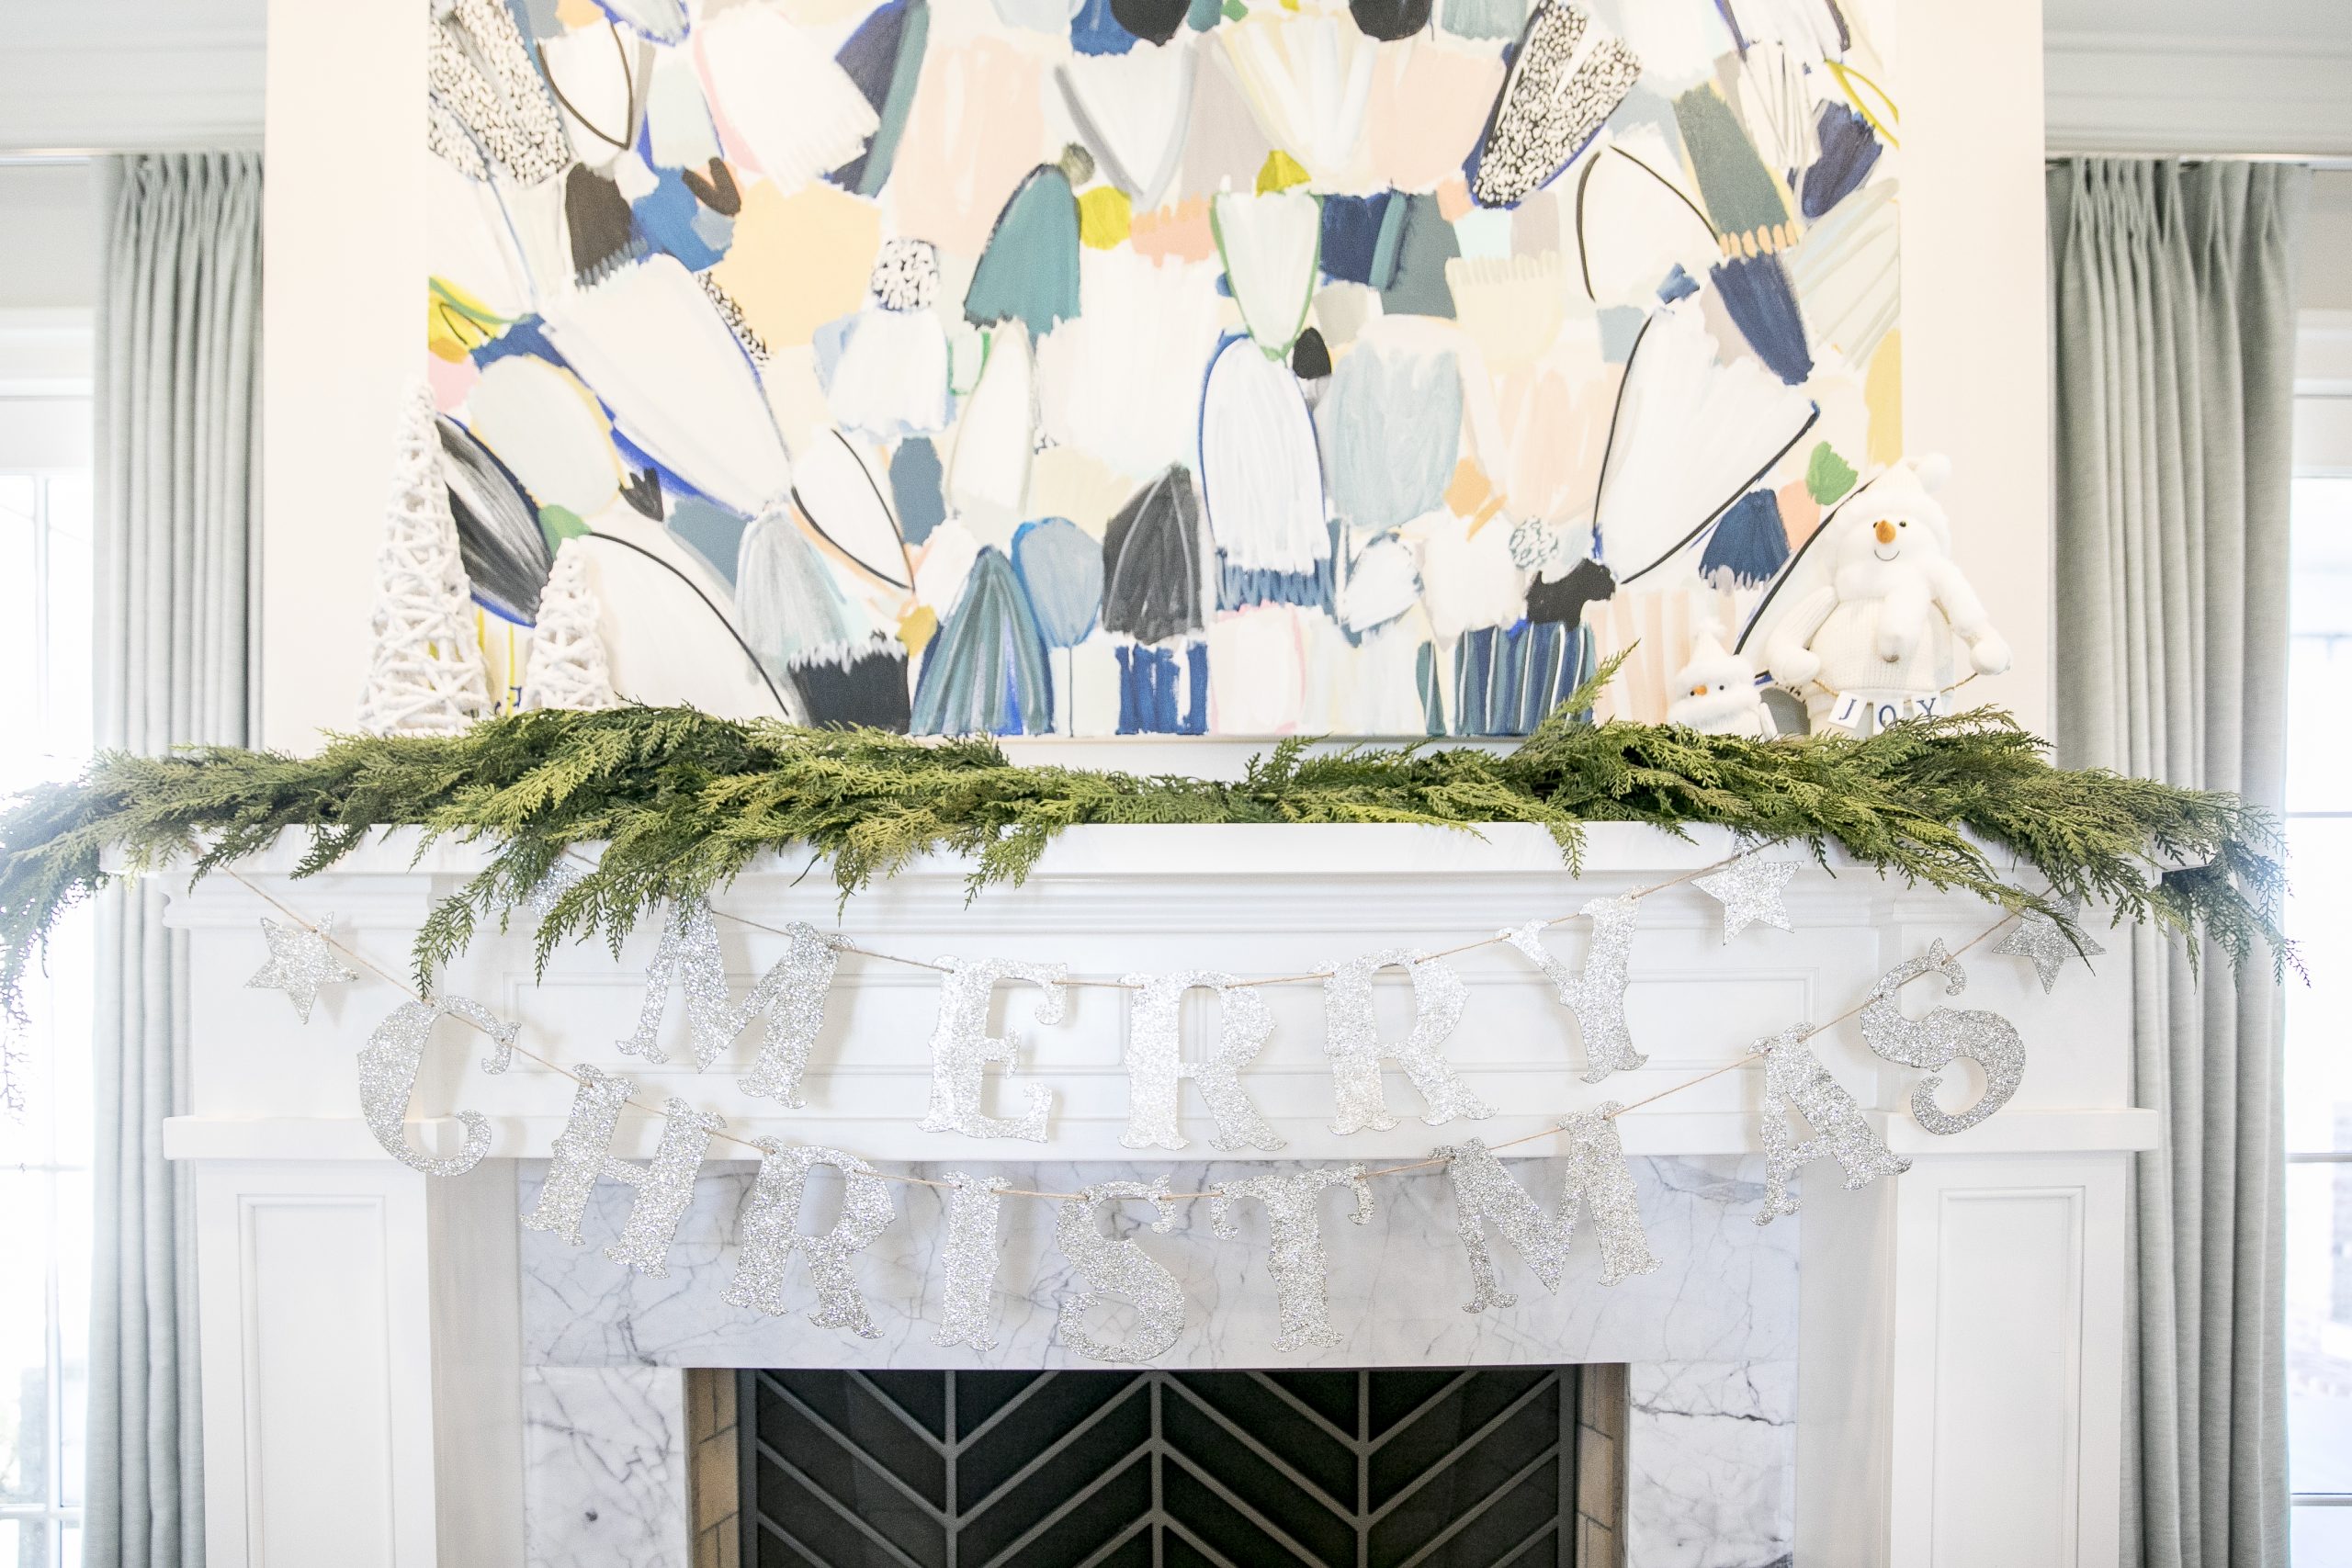 Chateau Chic Christmas House 2019

(Misty Leigh McElroy)
12/19/19